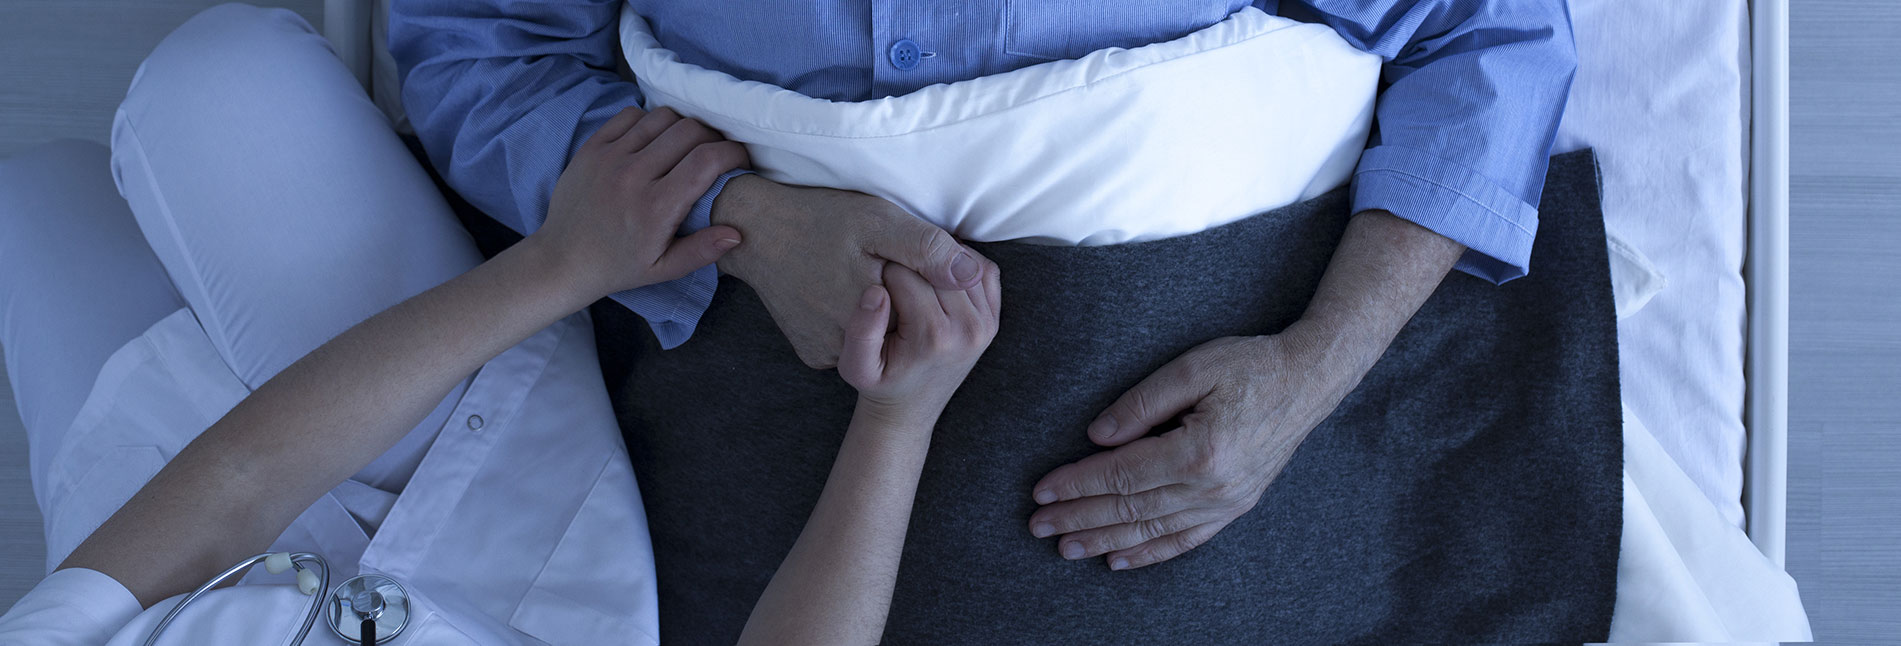 Hospice Versus Assisted Living: What’s the Difference?